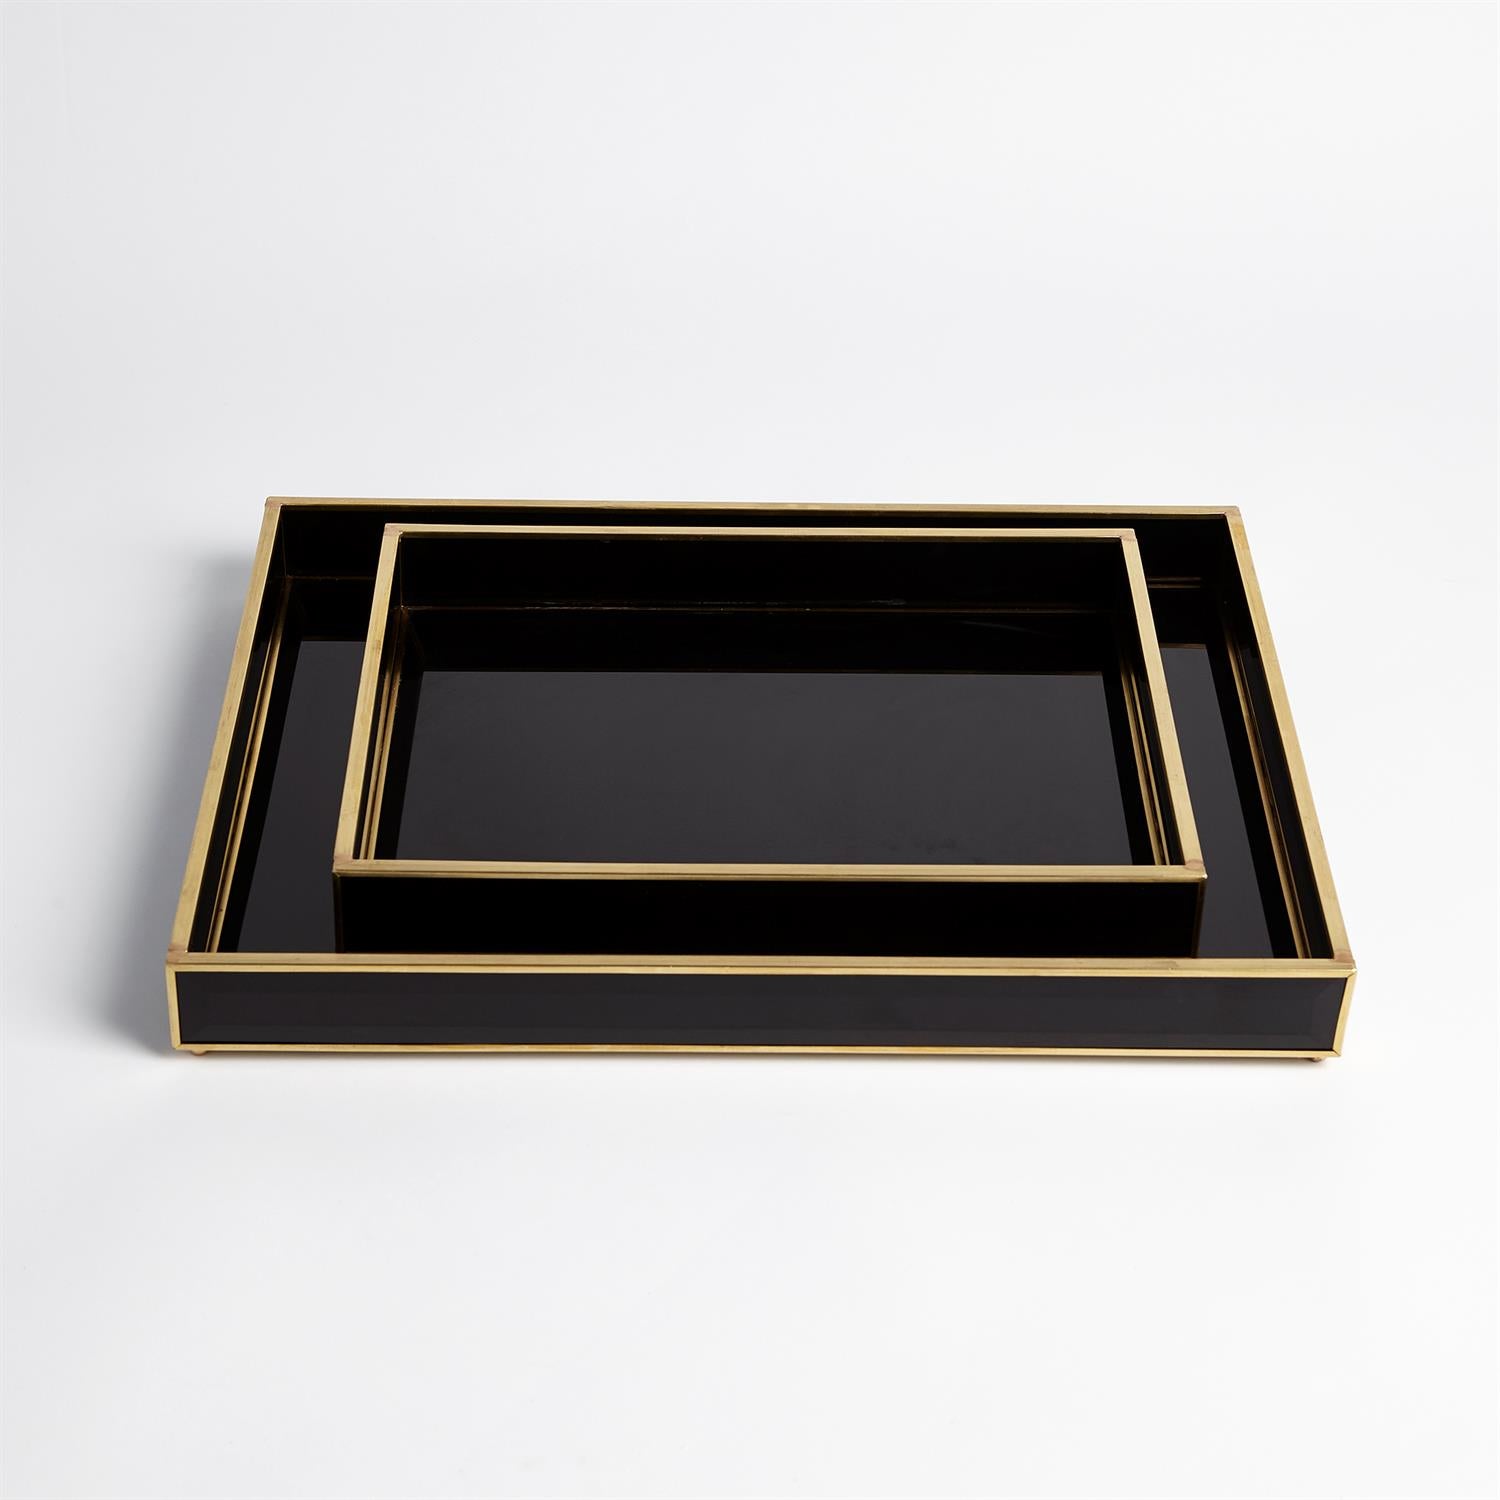 The Bella Black Tray - A versatile and chic The Bella Black Tray from GRACE BLU SHOPPE, perfect for serving or organizing your space.